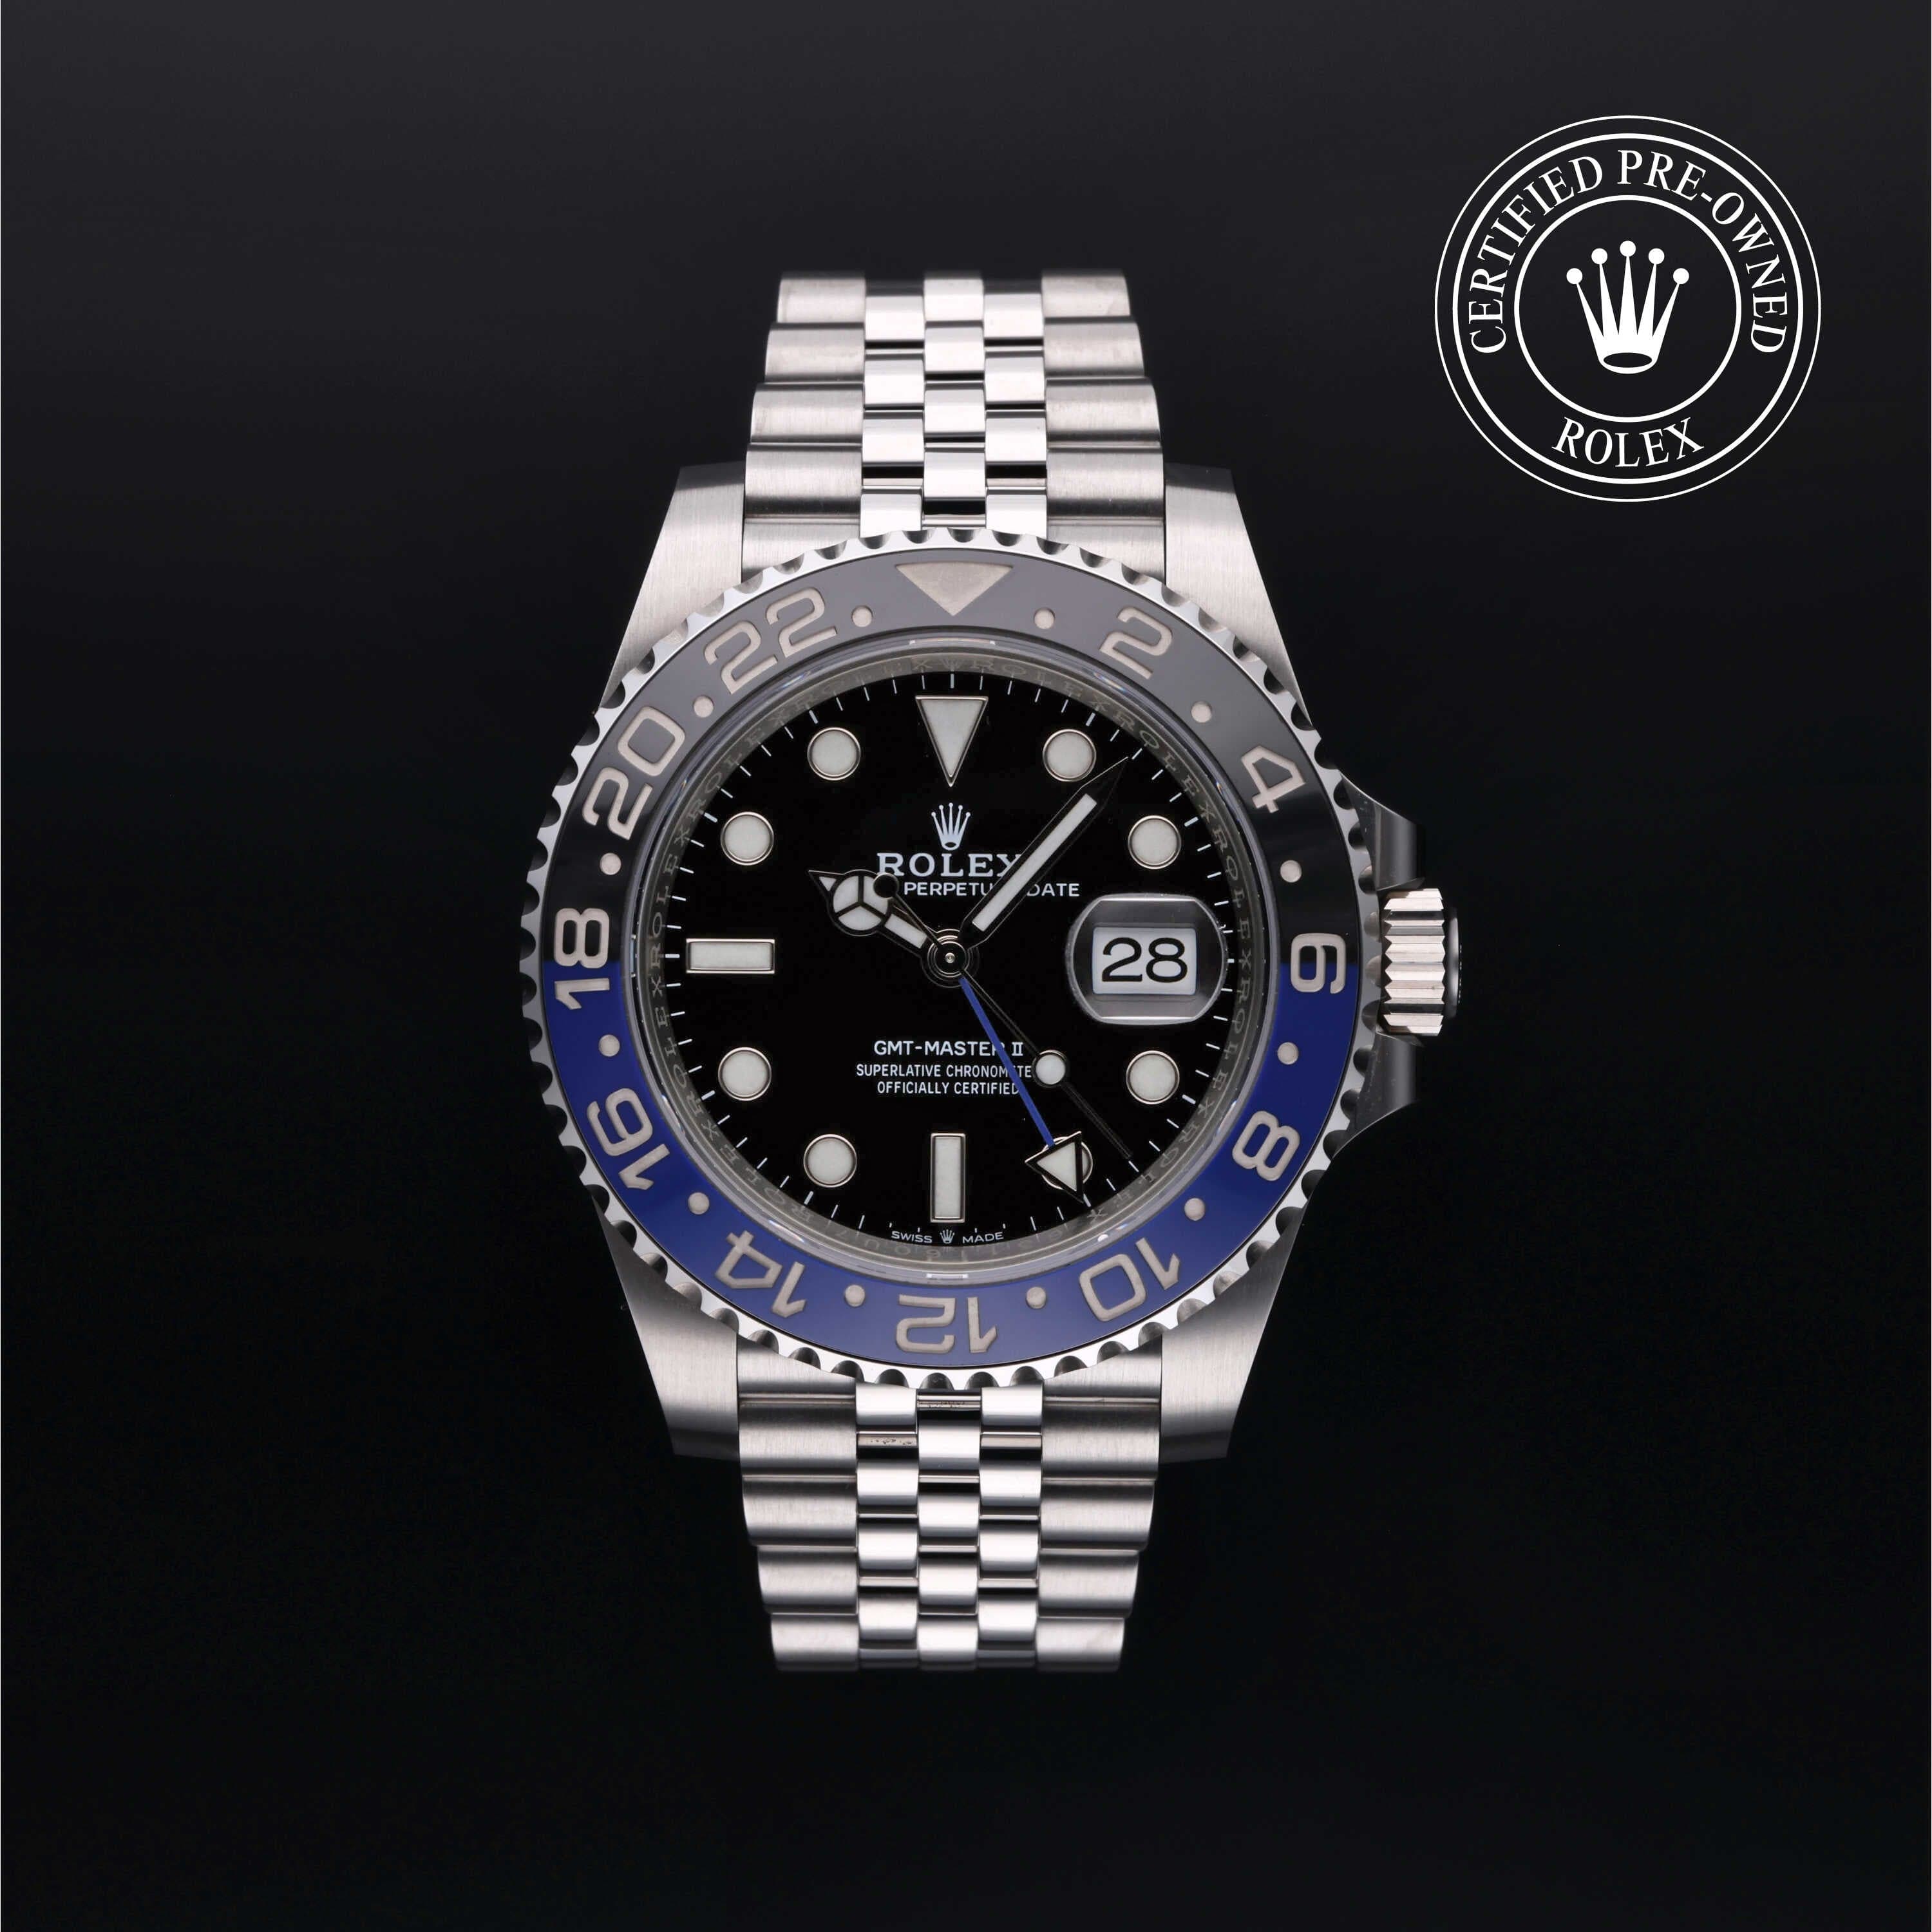 Rolex Certified Pre-Owned GMT Master II in Oyster, 40 mm, Stainless Steel 126710BLNR watch available at Long's Jewelers.